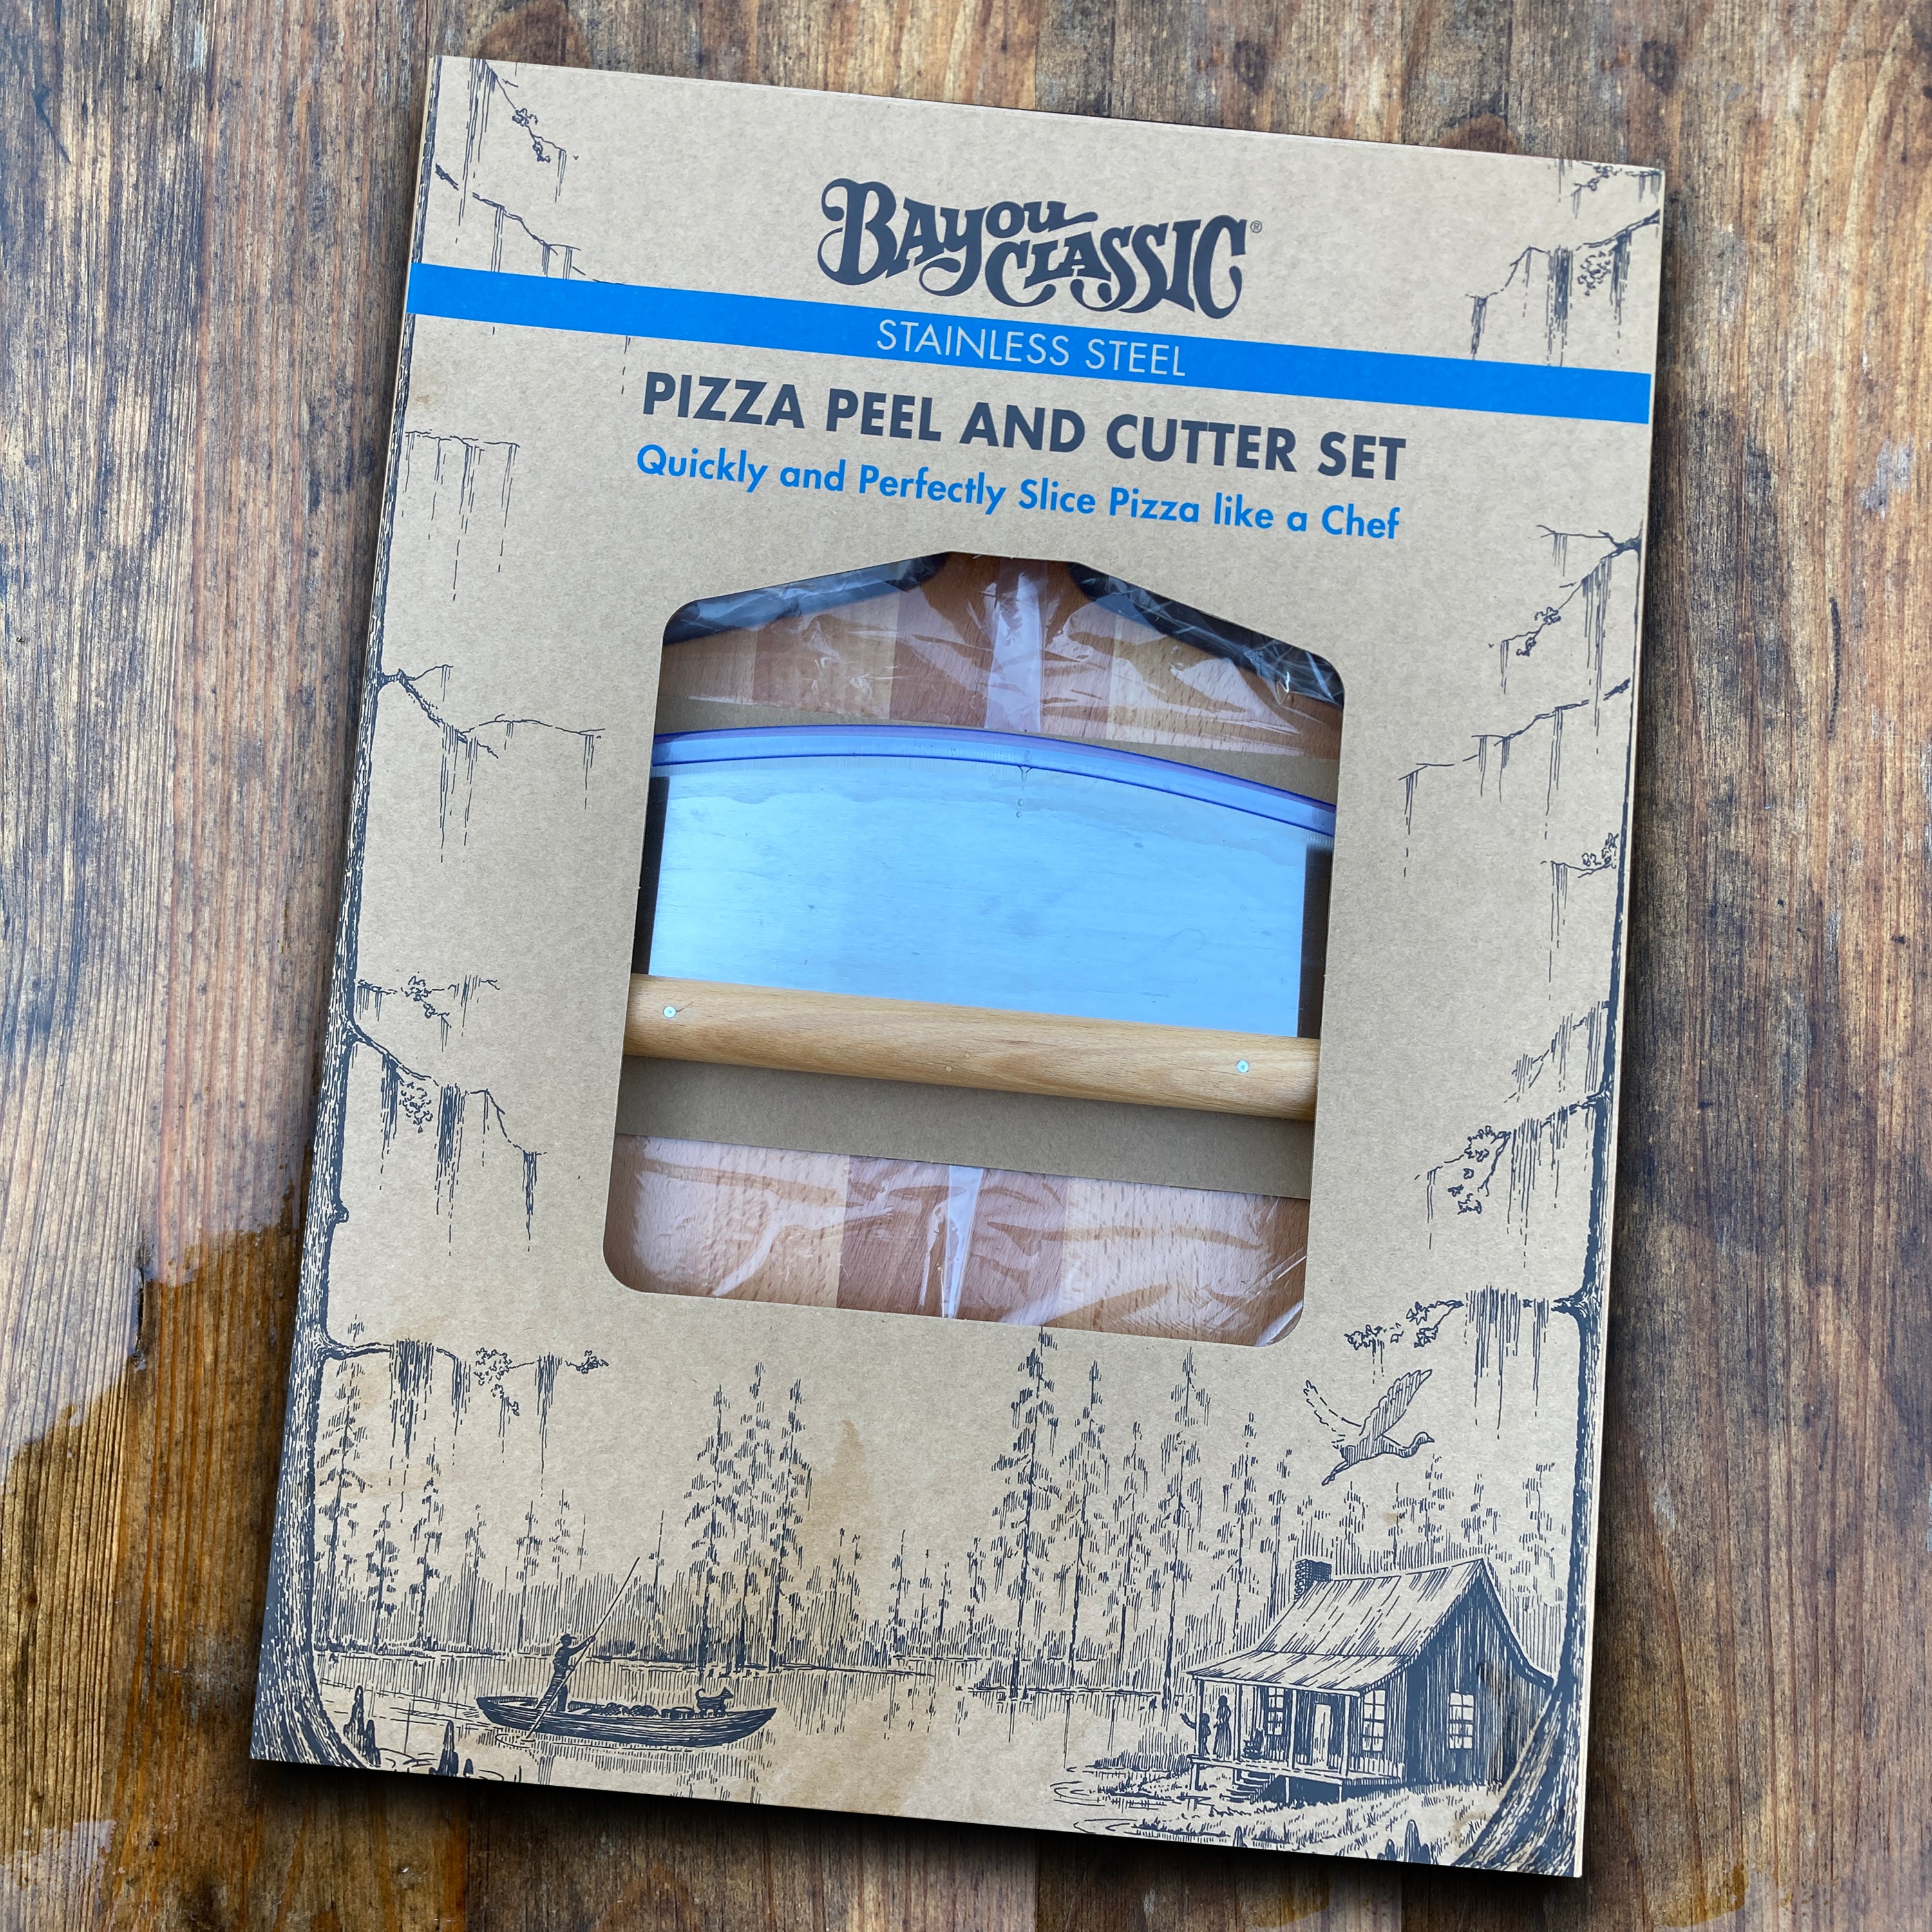 Pizza Peel and Cutter Set